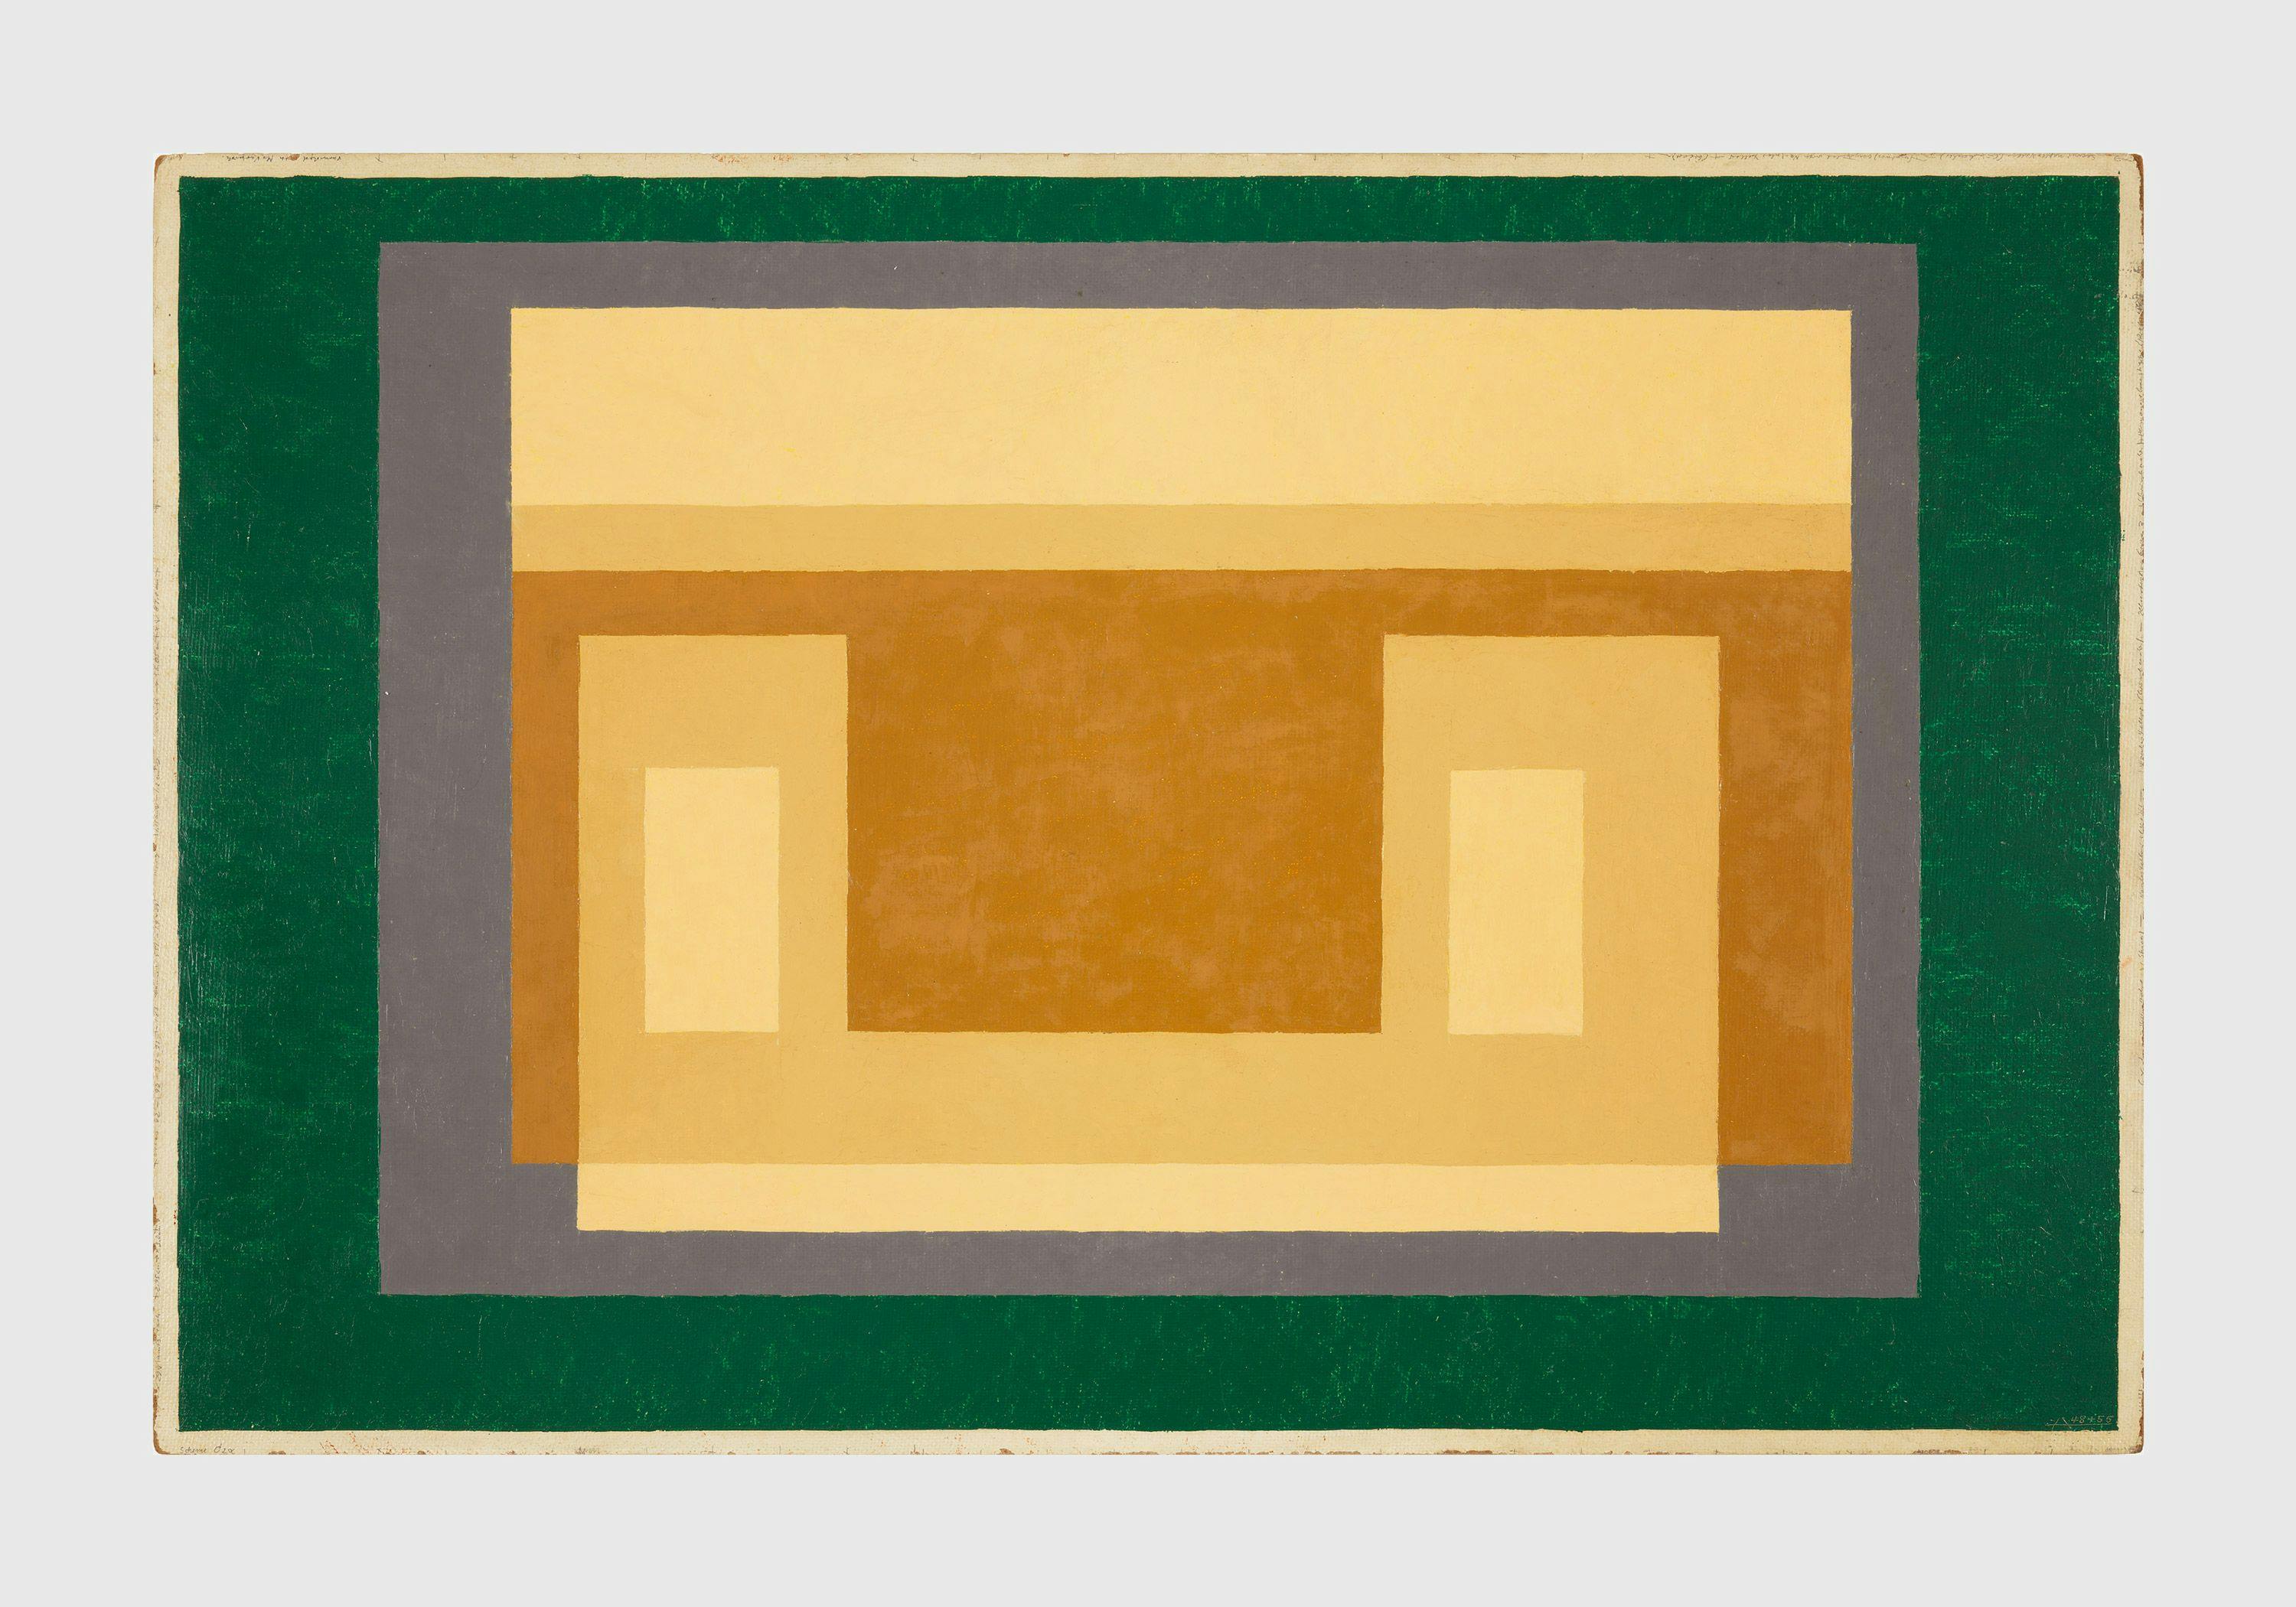 A painting by Josef Albers, called Untitled (Variant/Adobe), 1948 to 1955.